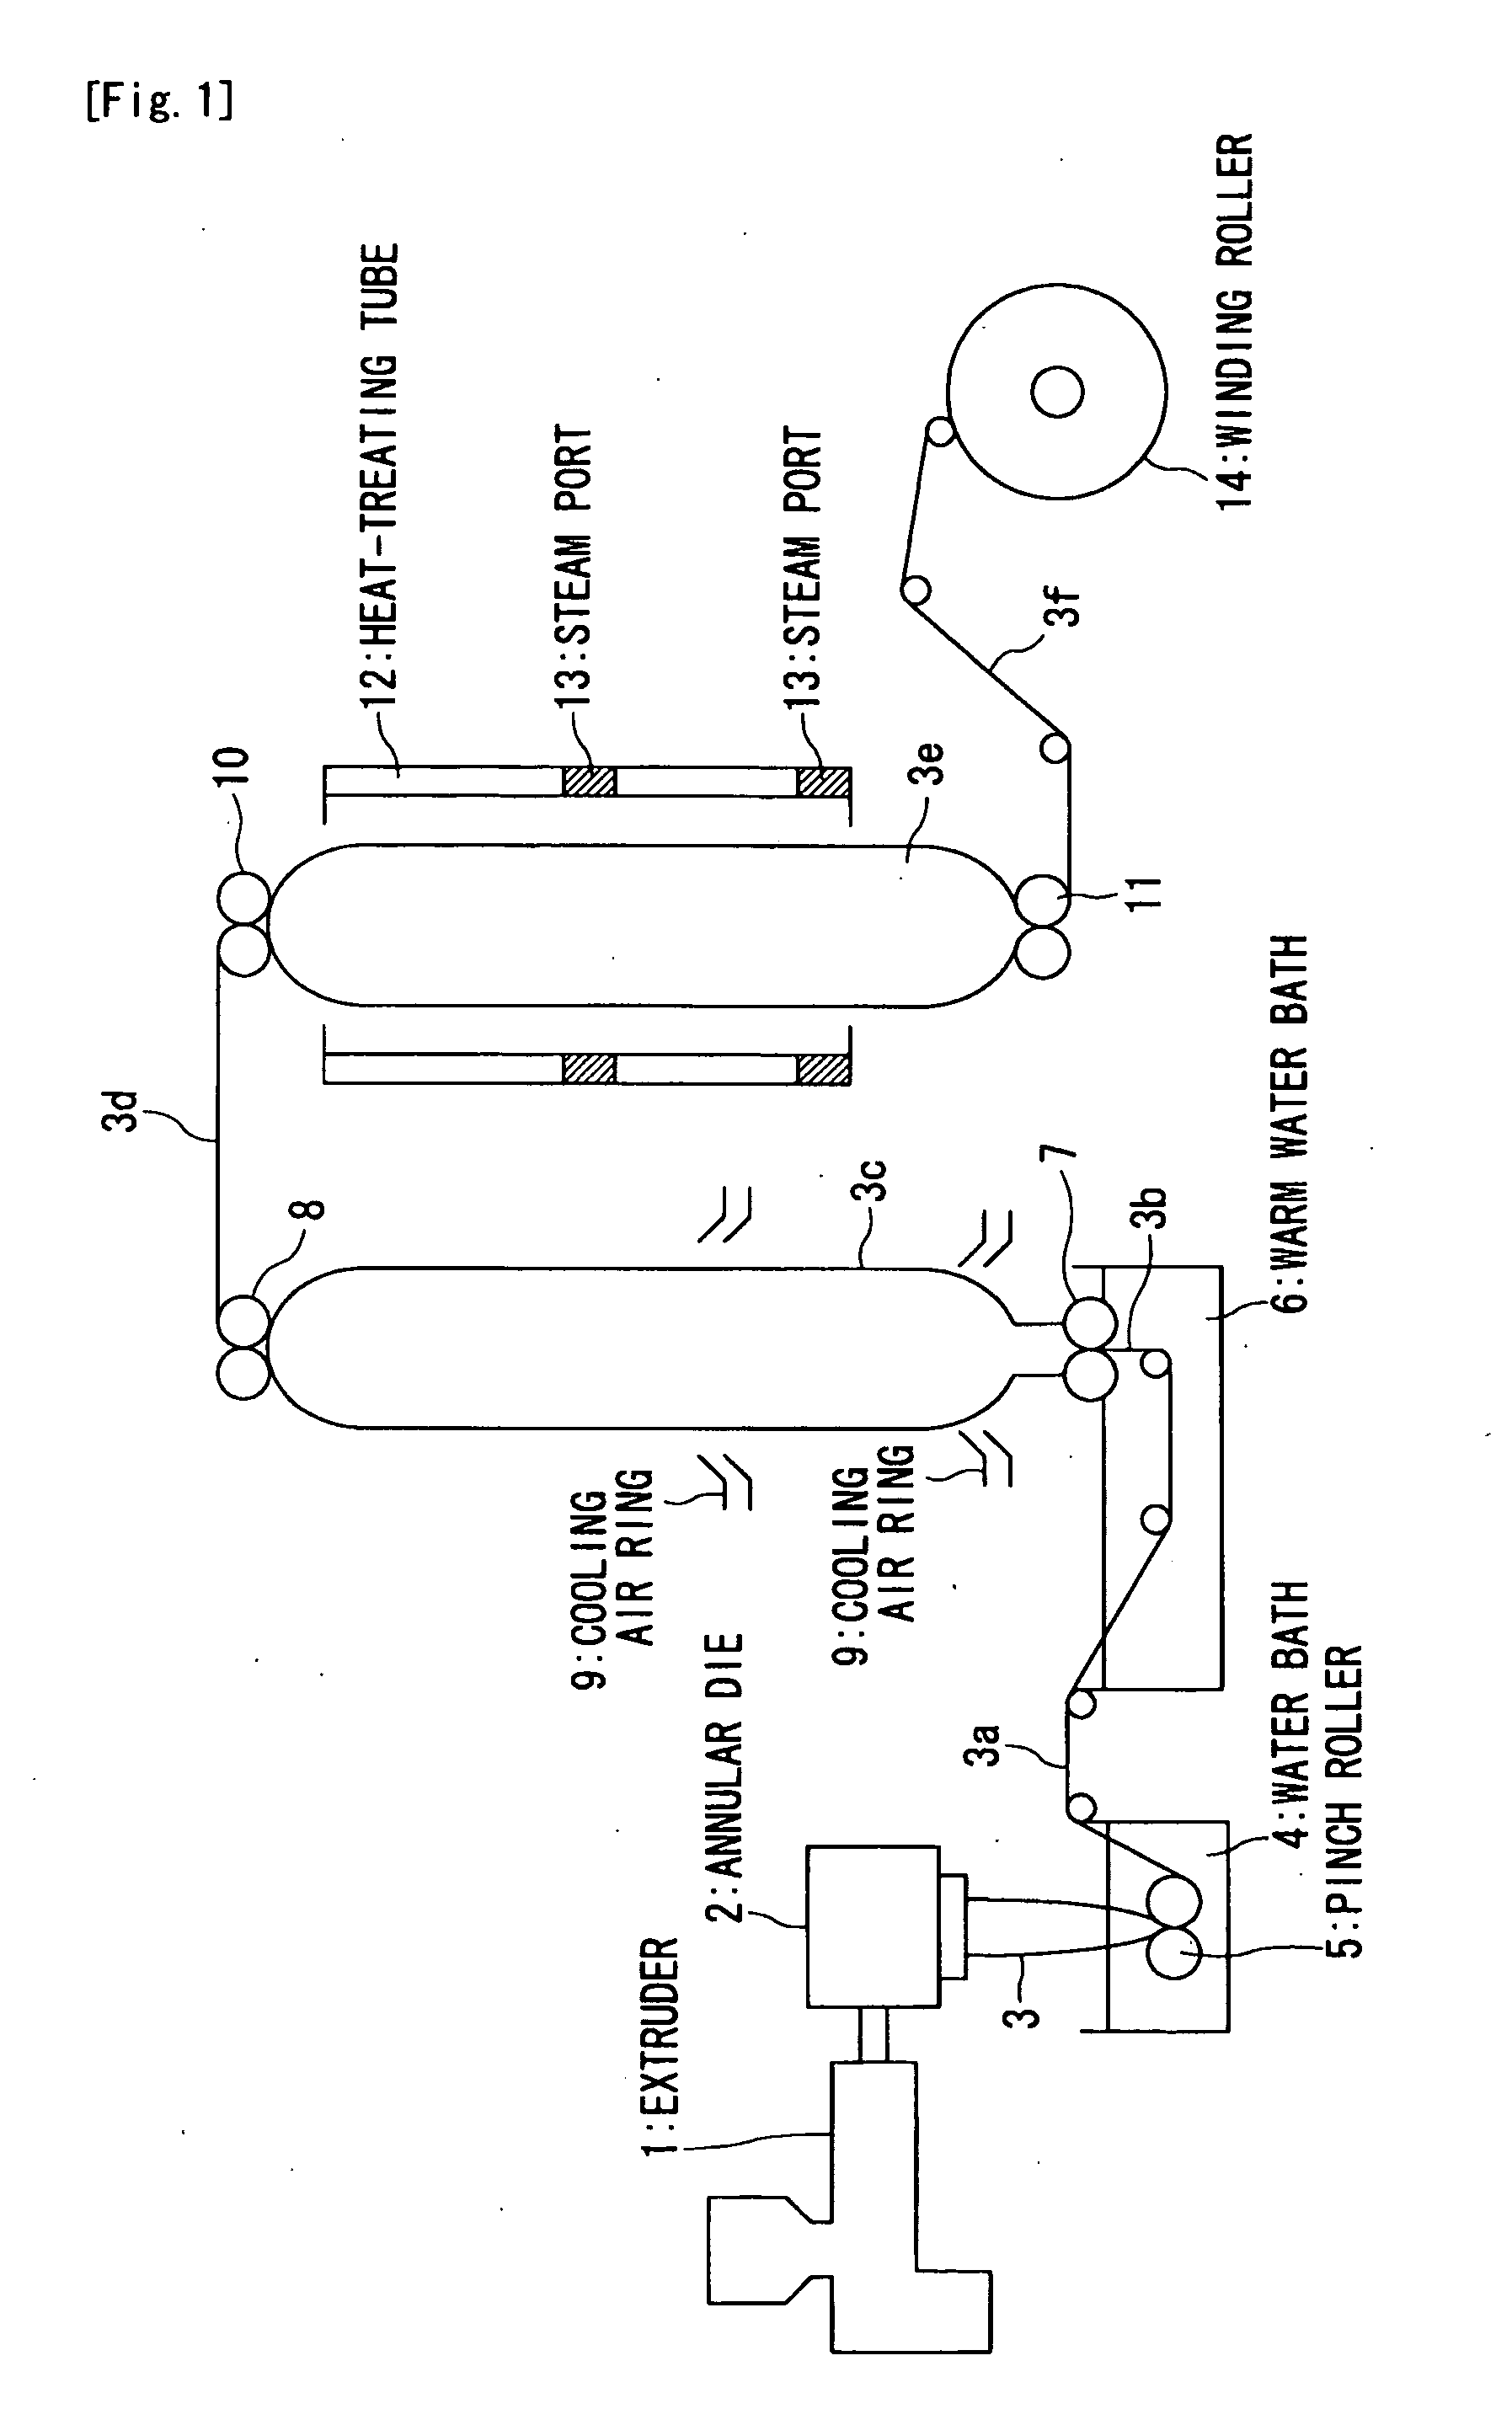 Heat-shrinkable multi-layer film for deep-draw forming, and process for production thereof